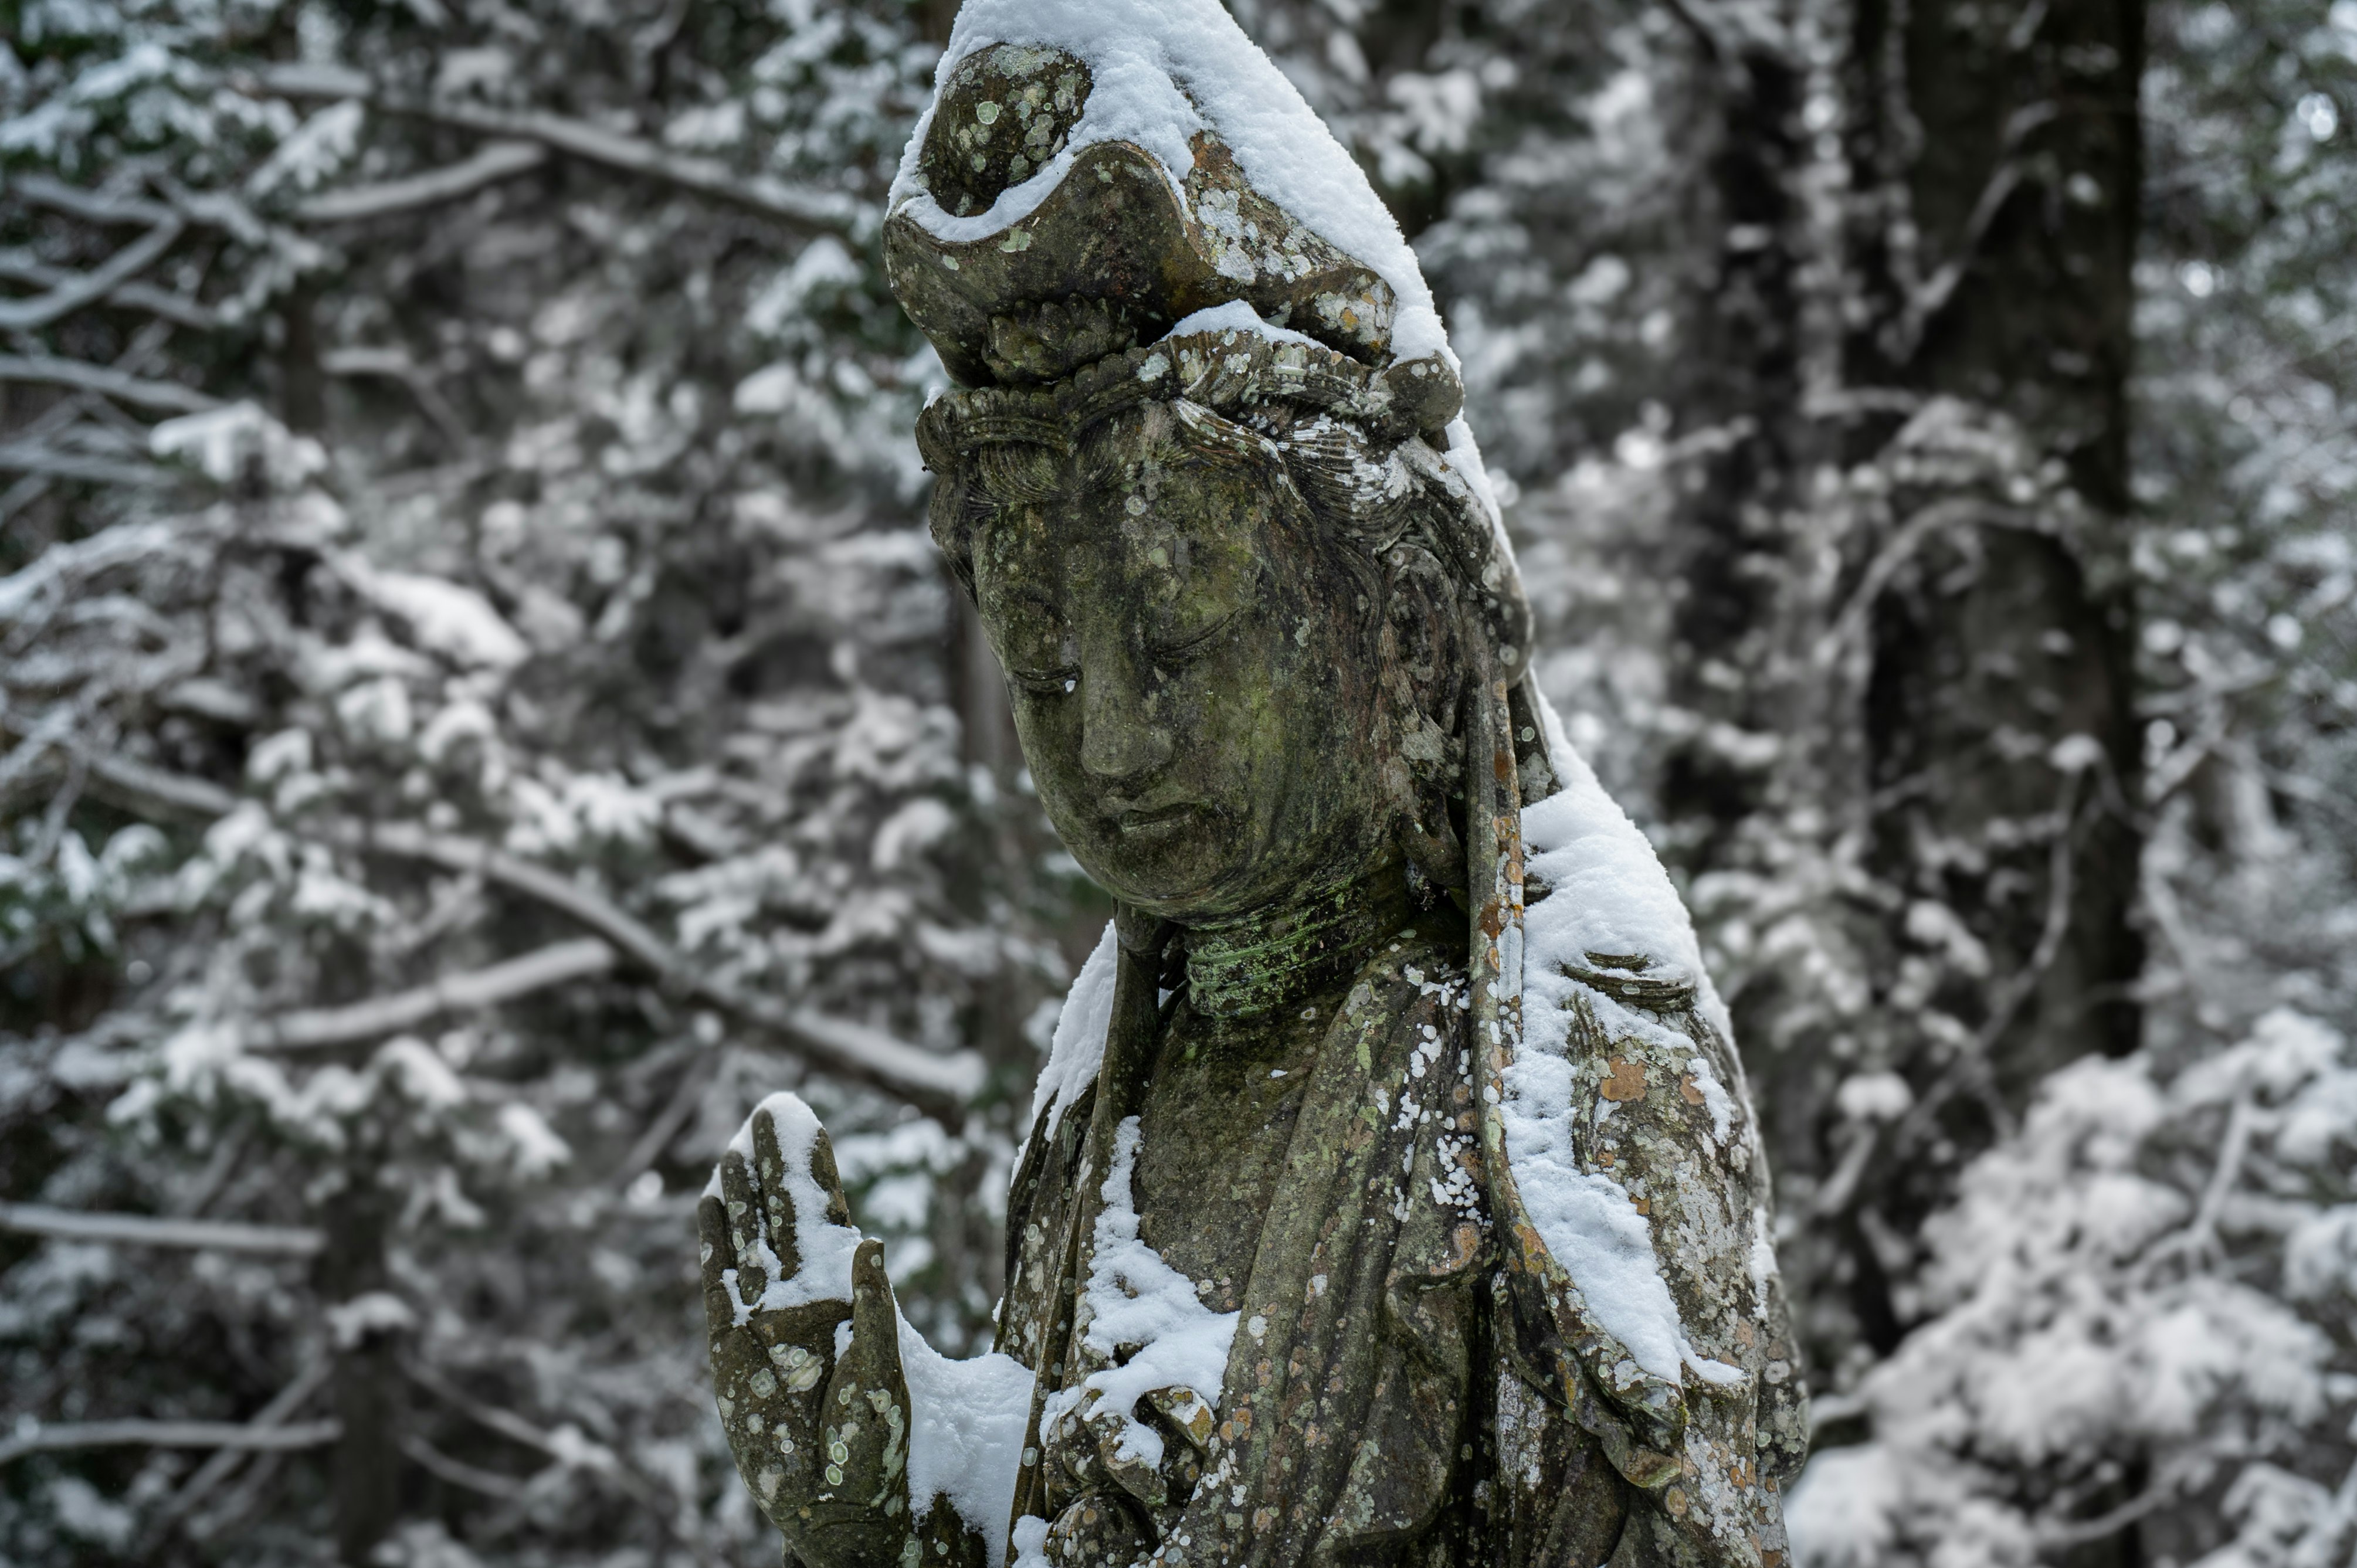 gray concrete human face bust on tree branch covered with snow